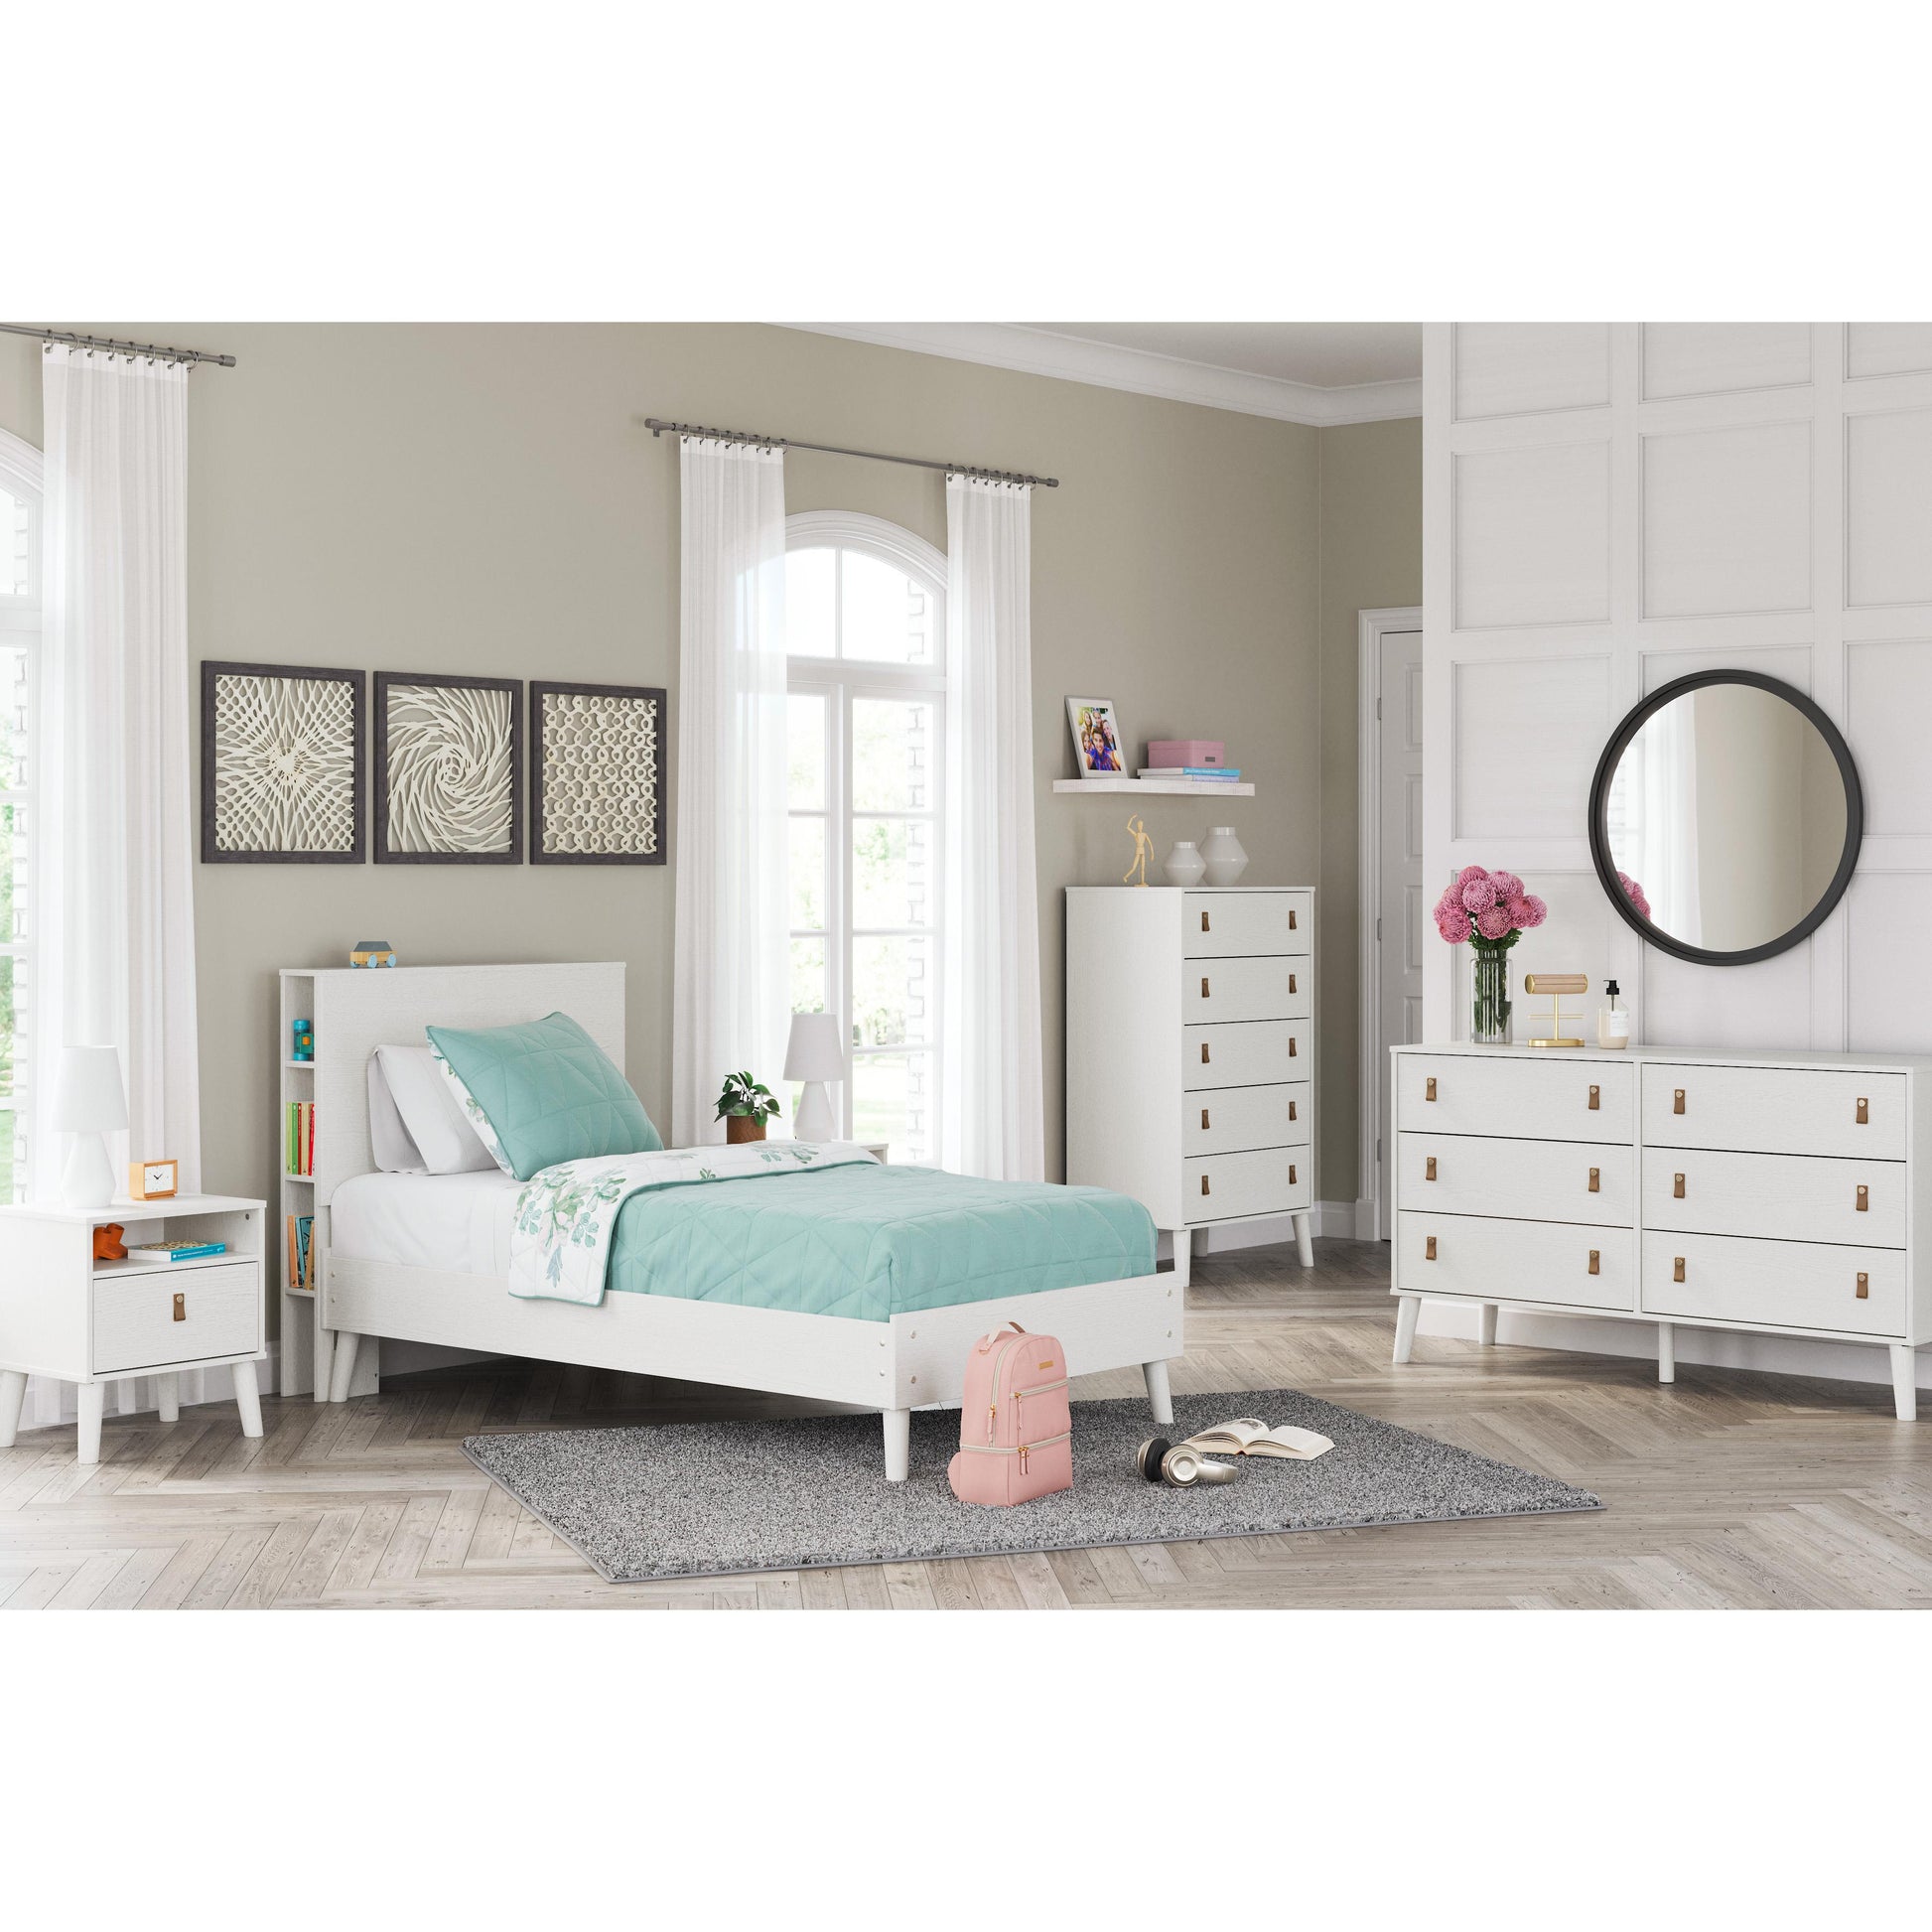 Signature Design by Ashley Kids Beds Bed EB1024-163/EB1024-111 IMAGE 7